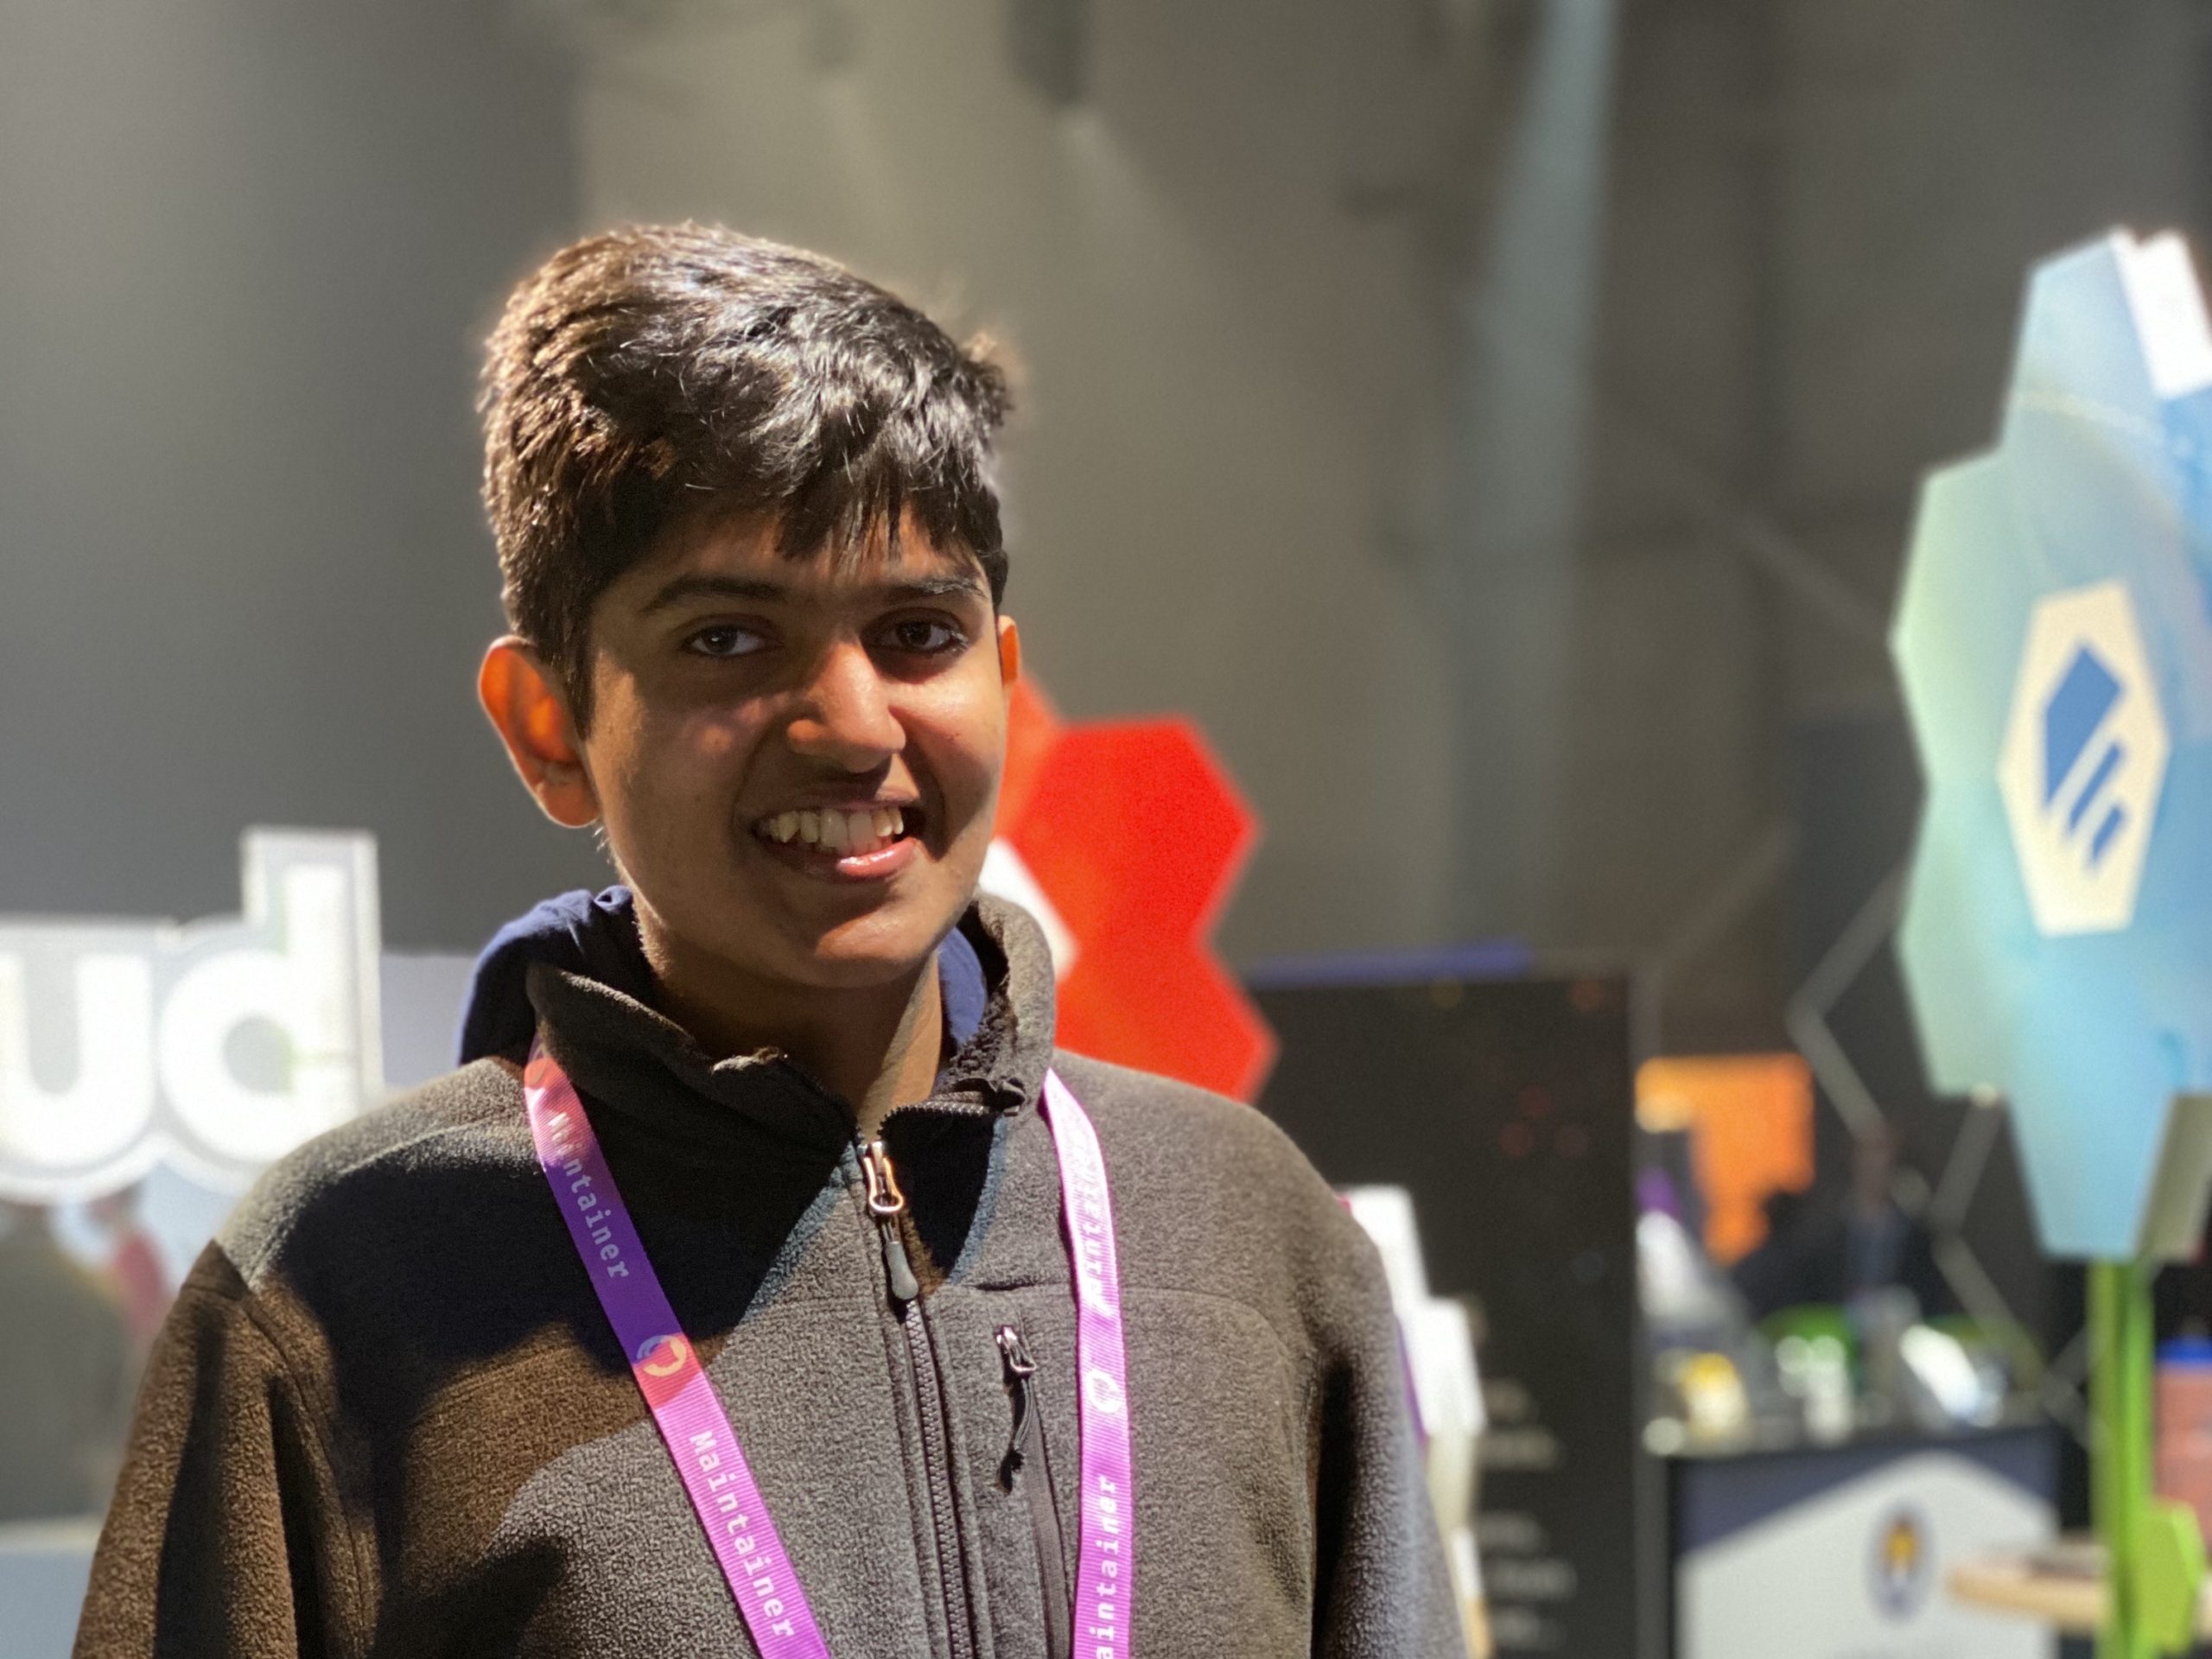 Vardhan Agrawal at the GitHub Universe 2019 conference after being invited and recognized for an all-expenses paid trip